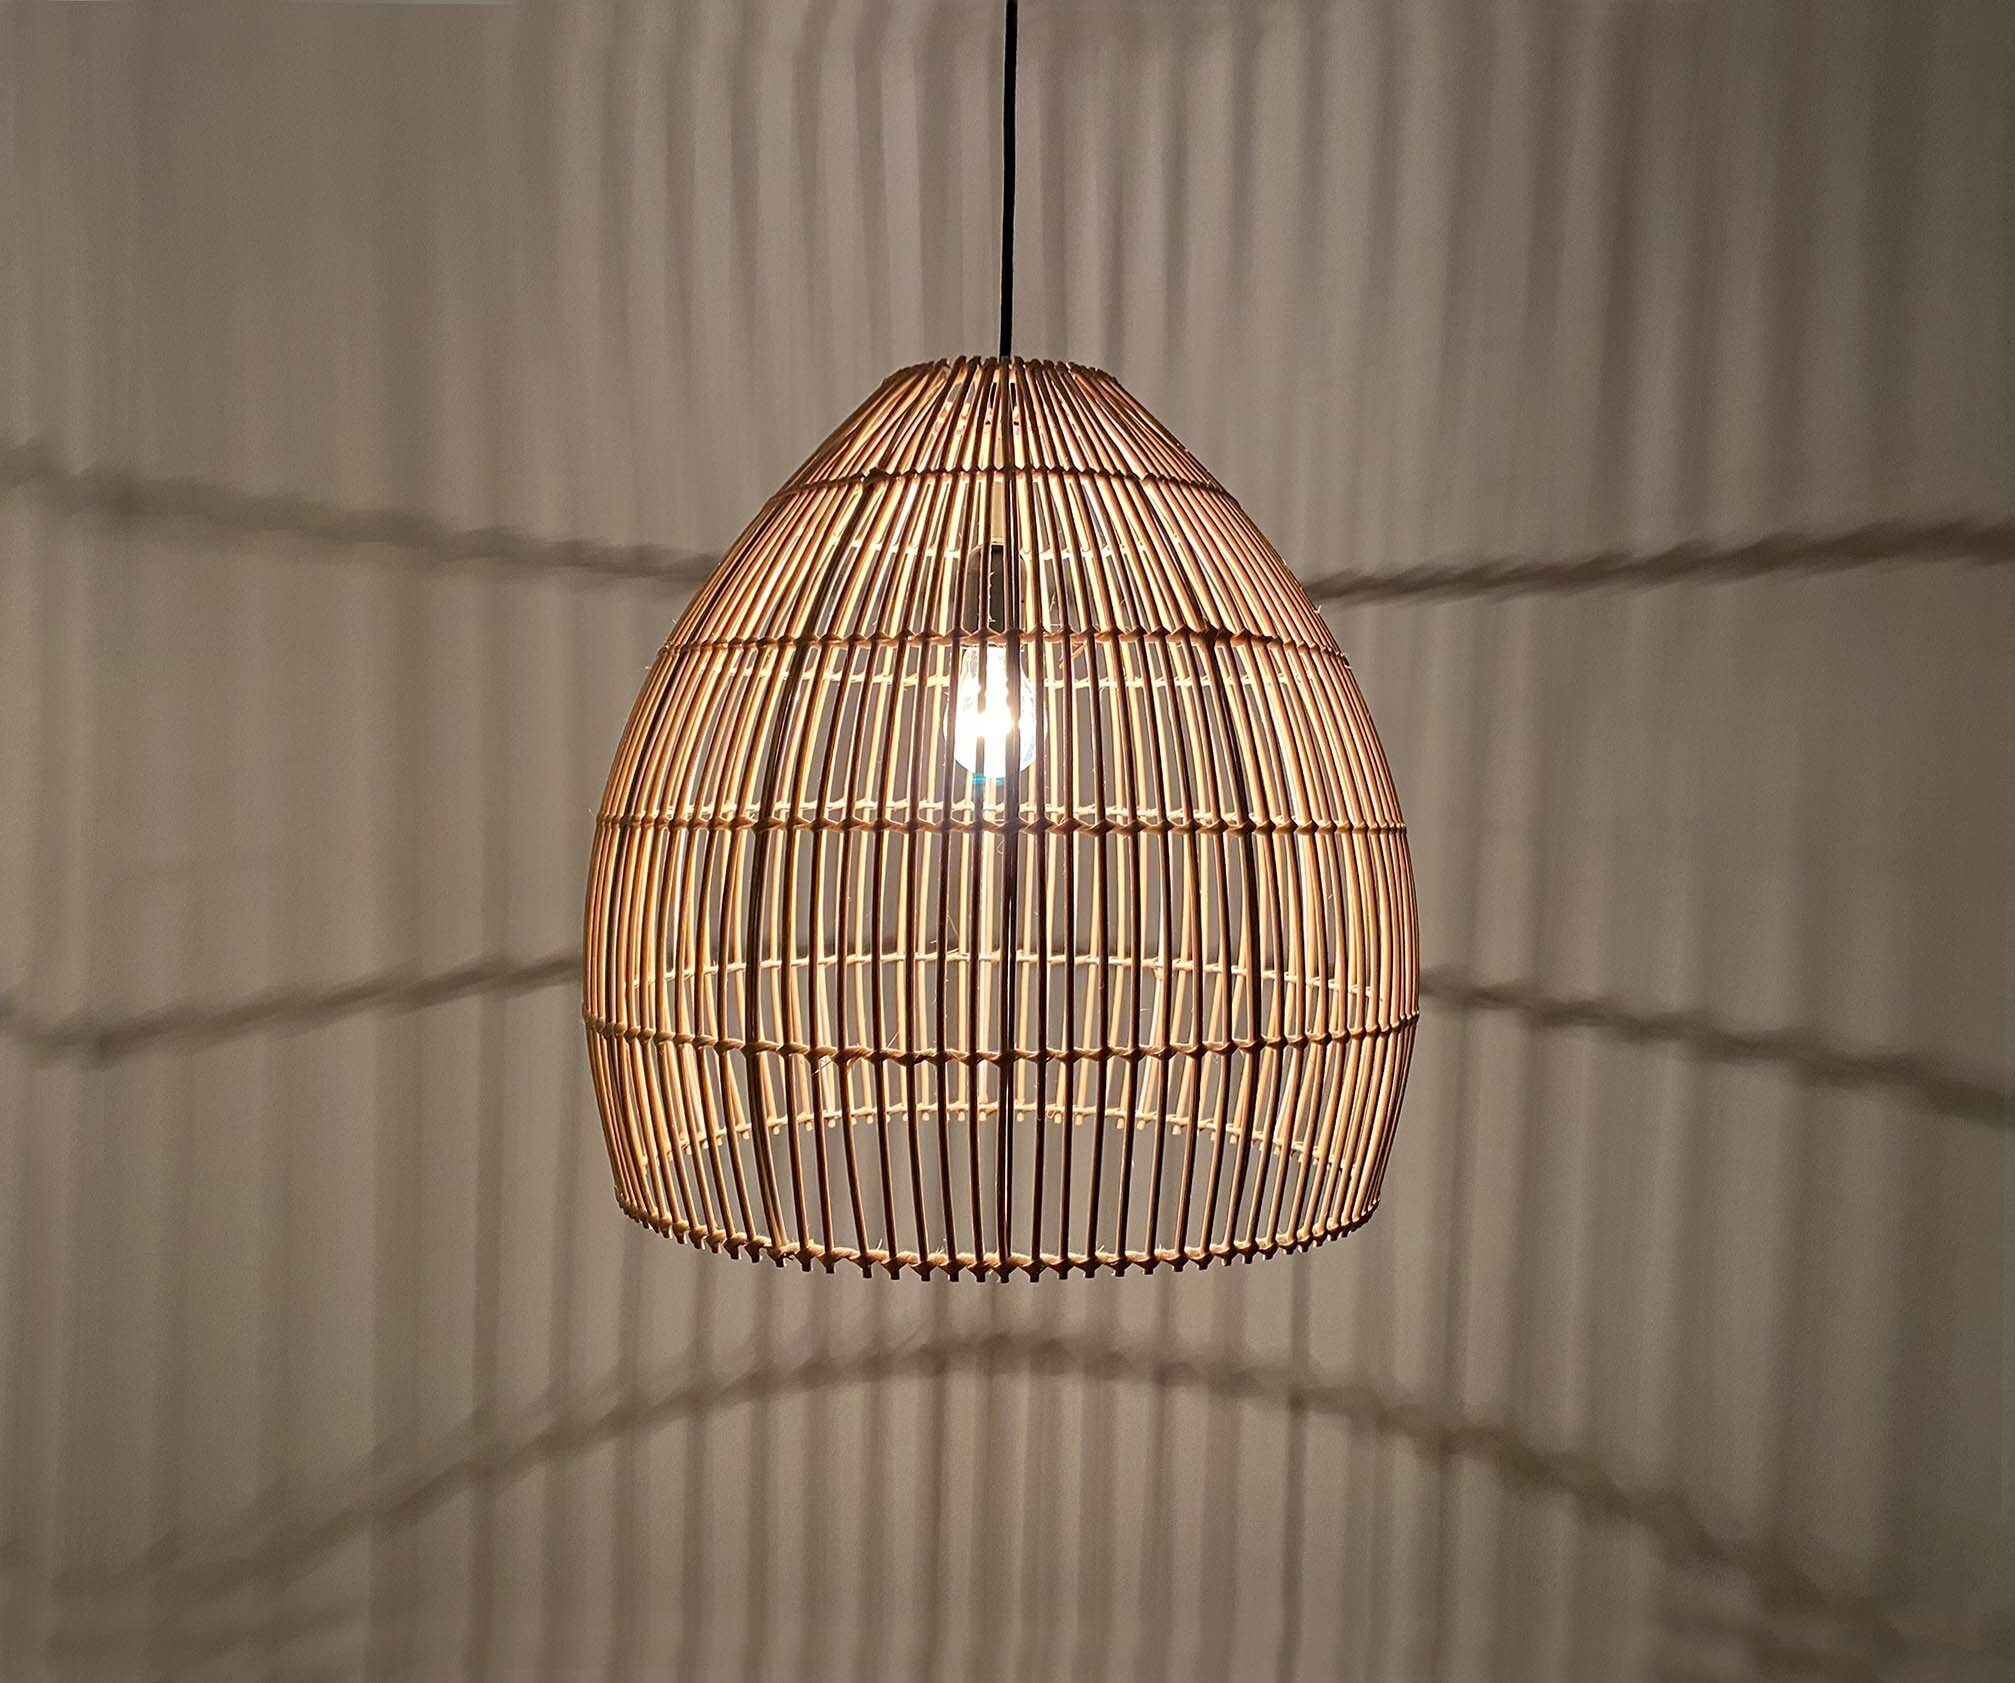 IIII.09 LED fabric pendant lamp By llll